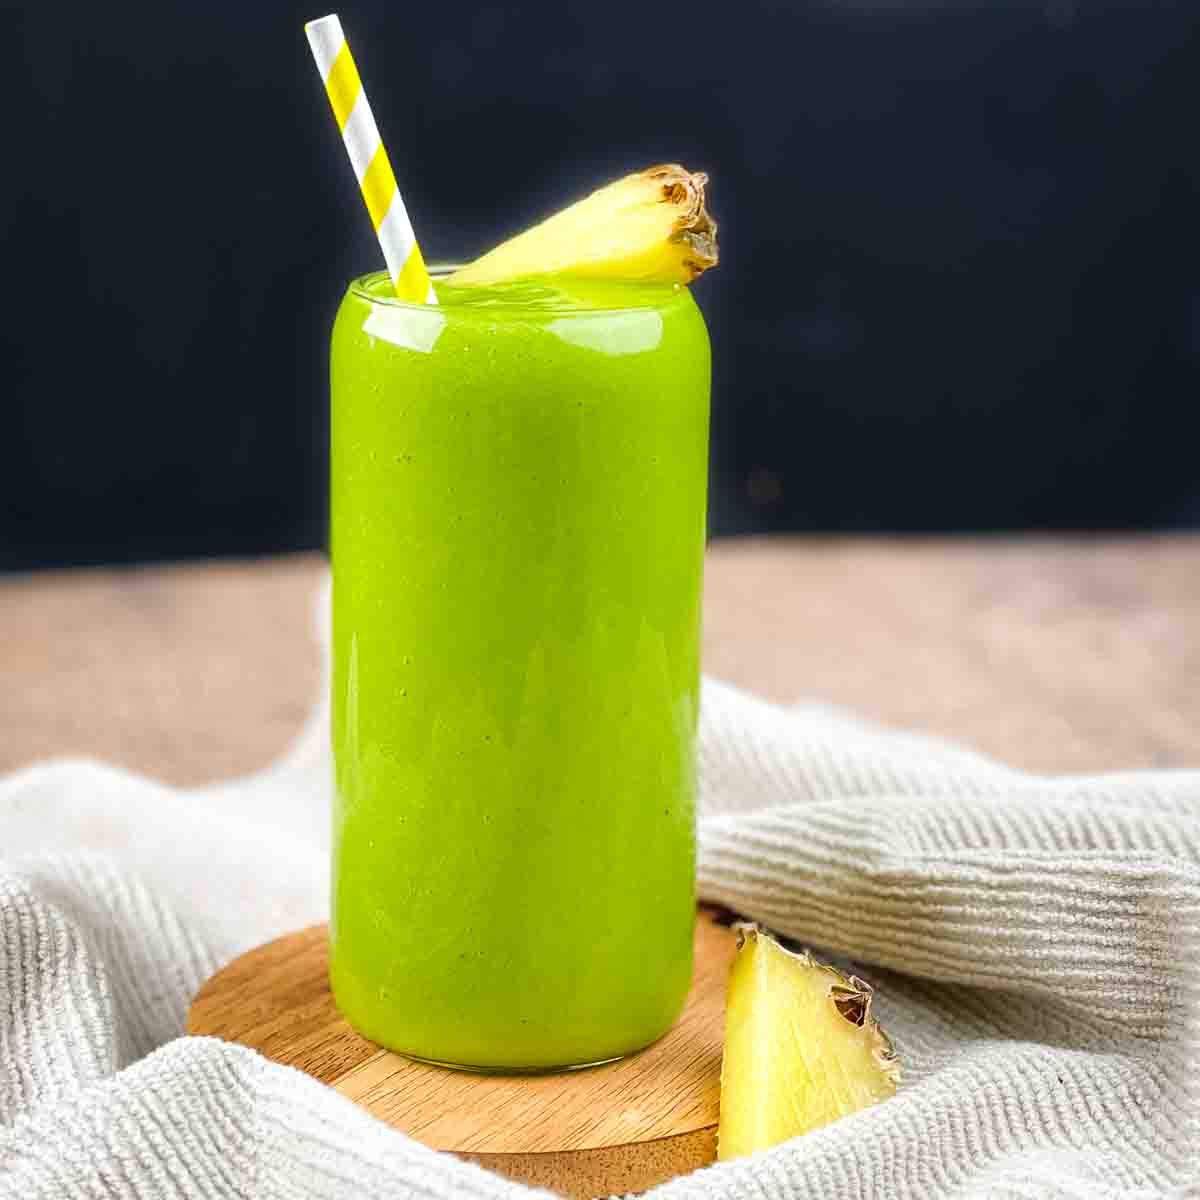 The green tropical smoothie in a tall glass with a white and yellow striped straw.